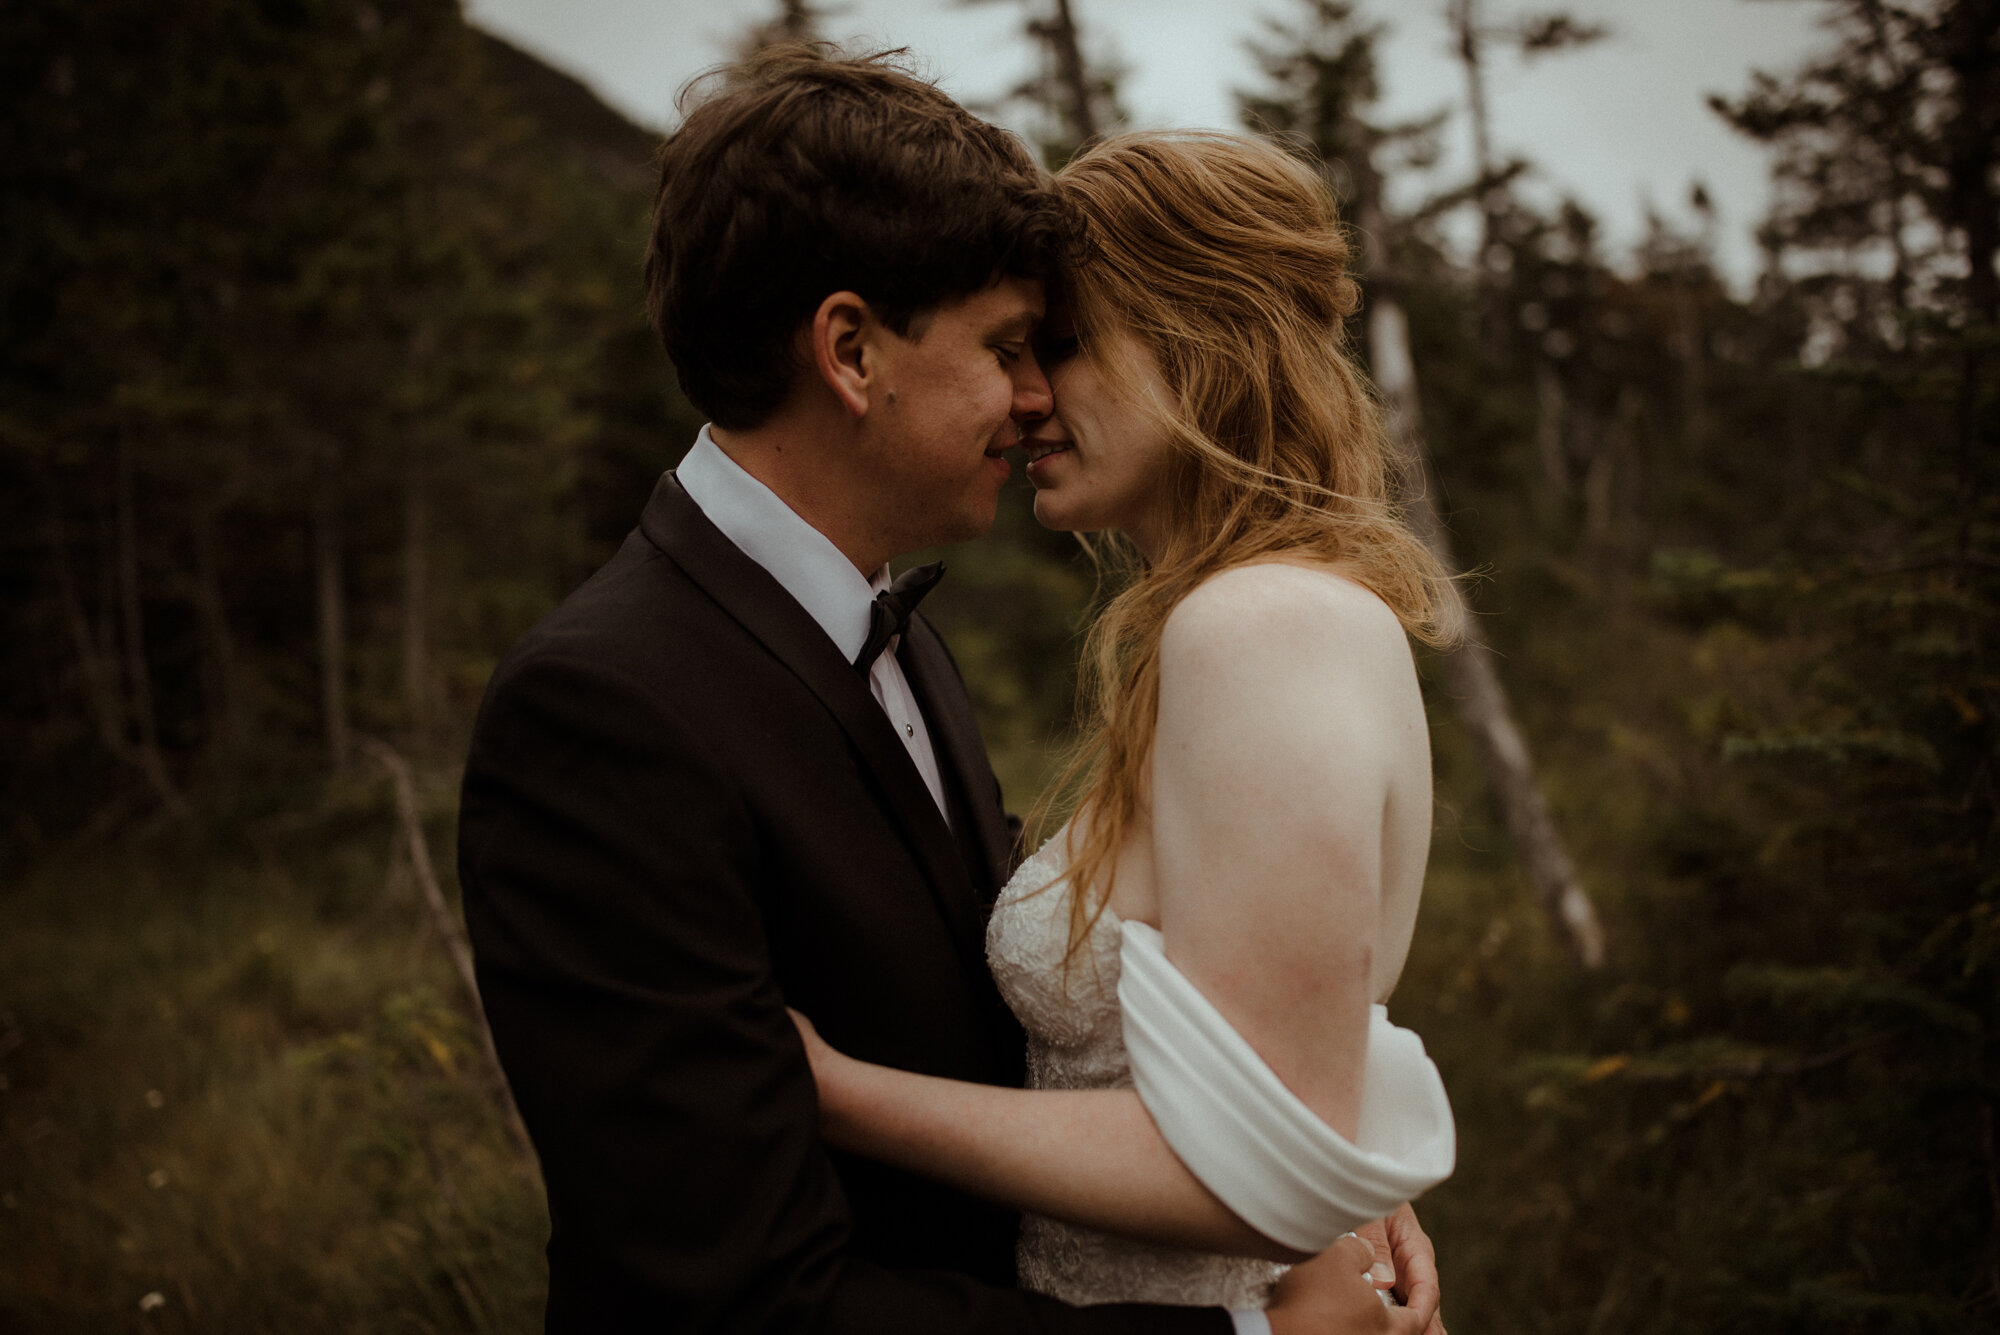 Autumn Elopement in New Hampshire - Backyard Wedding during COVID and Sunrise Hike in Wedding Dress - White Sails Creative_108.jpg